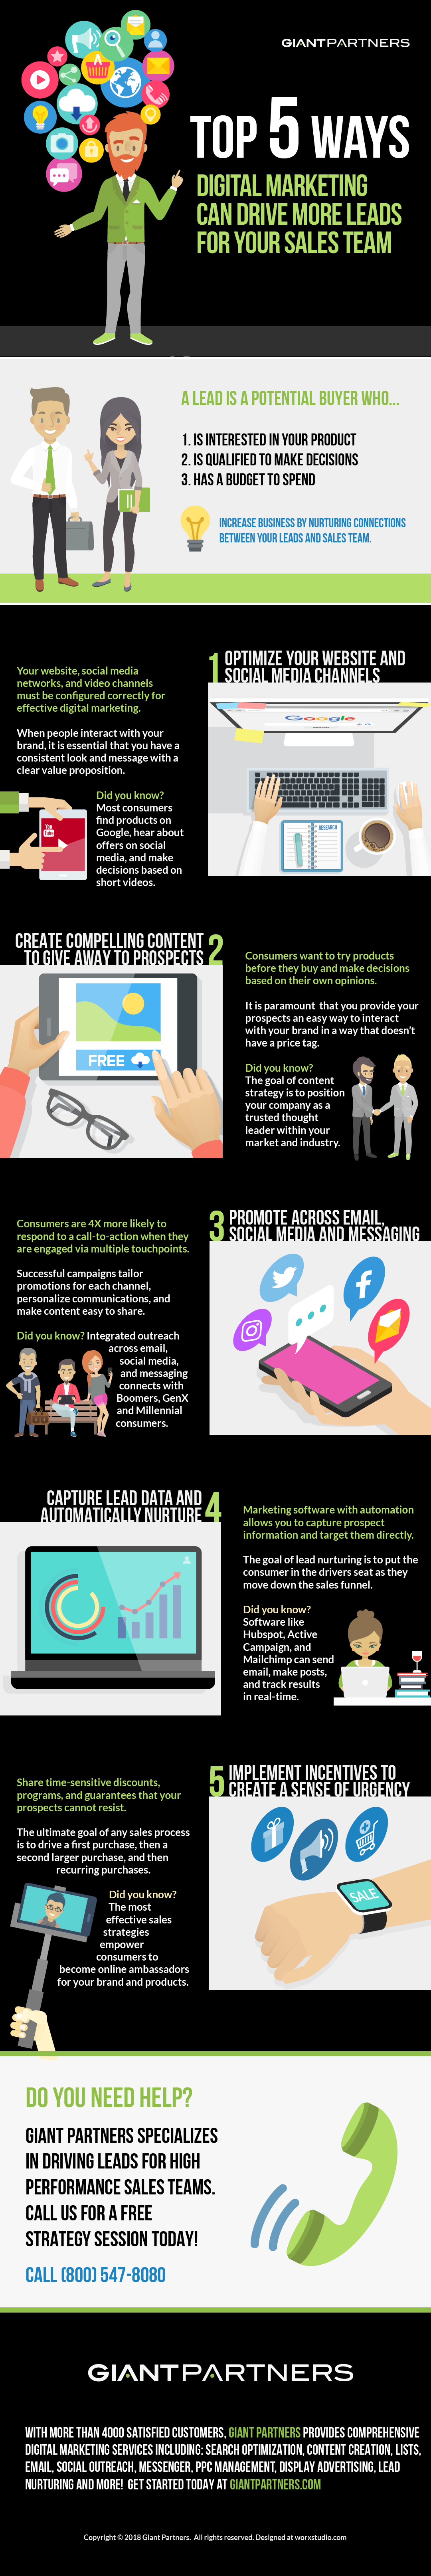 Digital Marketing for Lead Generation Infographic